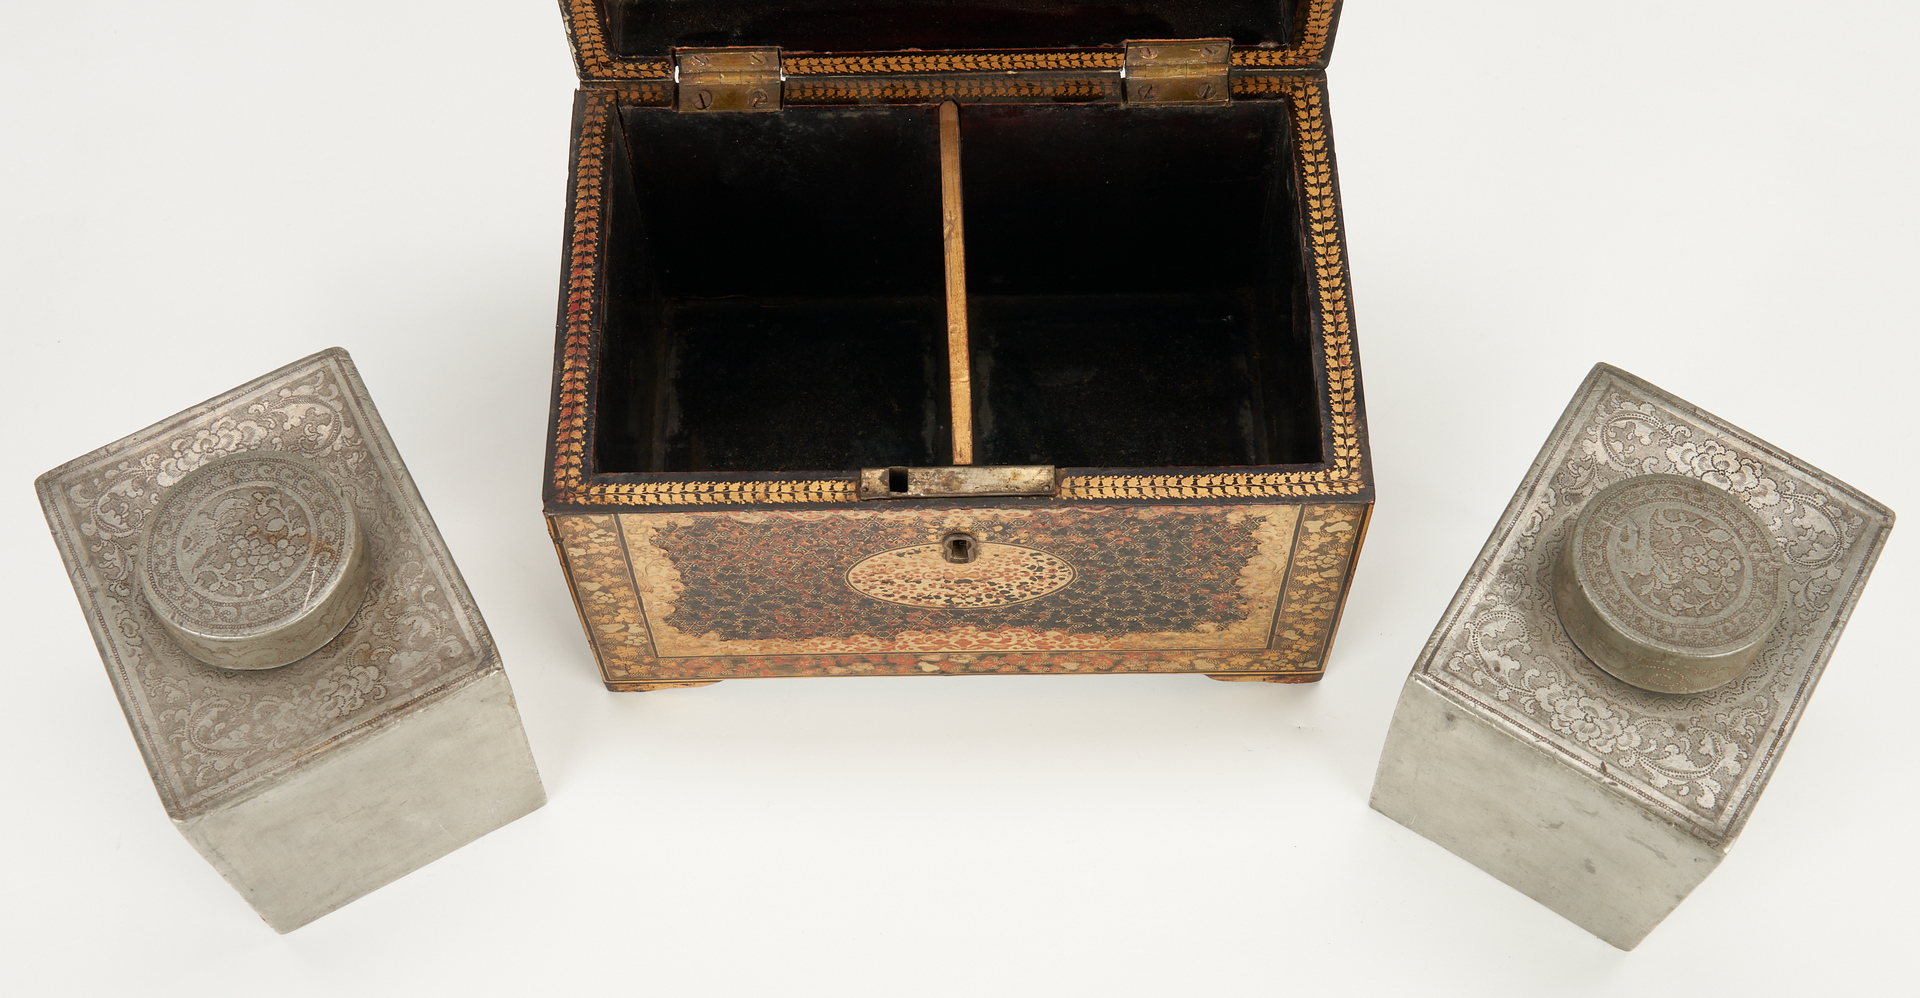 Lot 138: 4 Wooden Boxes, incl. Chinoiserie Tea Caddy & Apothecary Kit